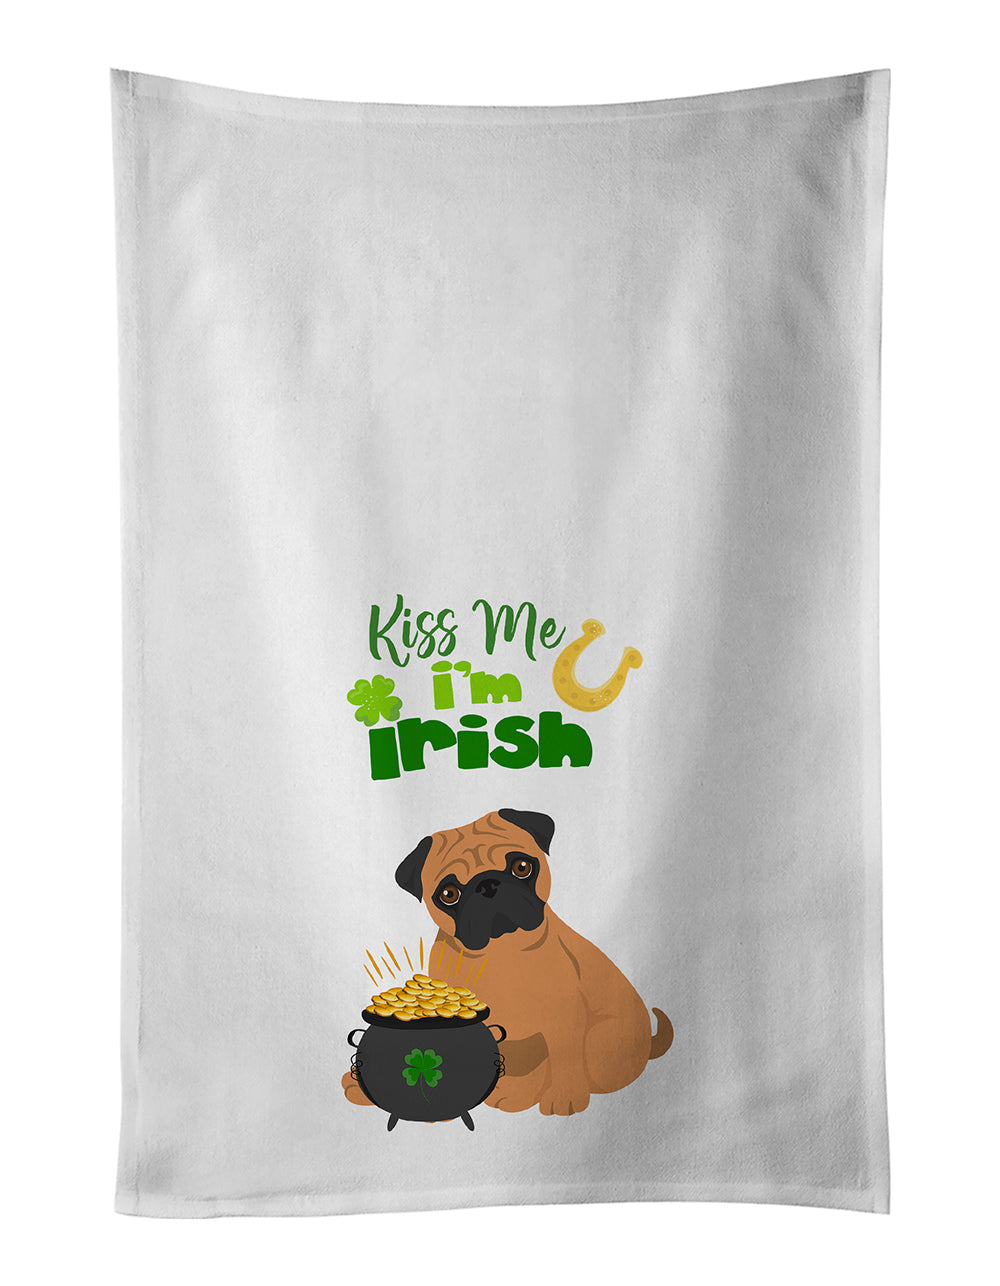 Buy this Apricot Pug St. Patrick's Day White Kitchen Towel Set of 2 Dish Towels